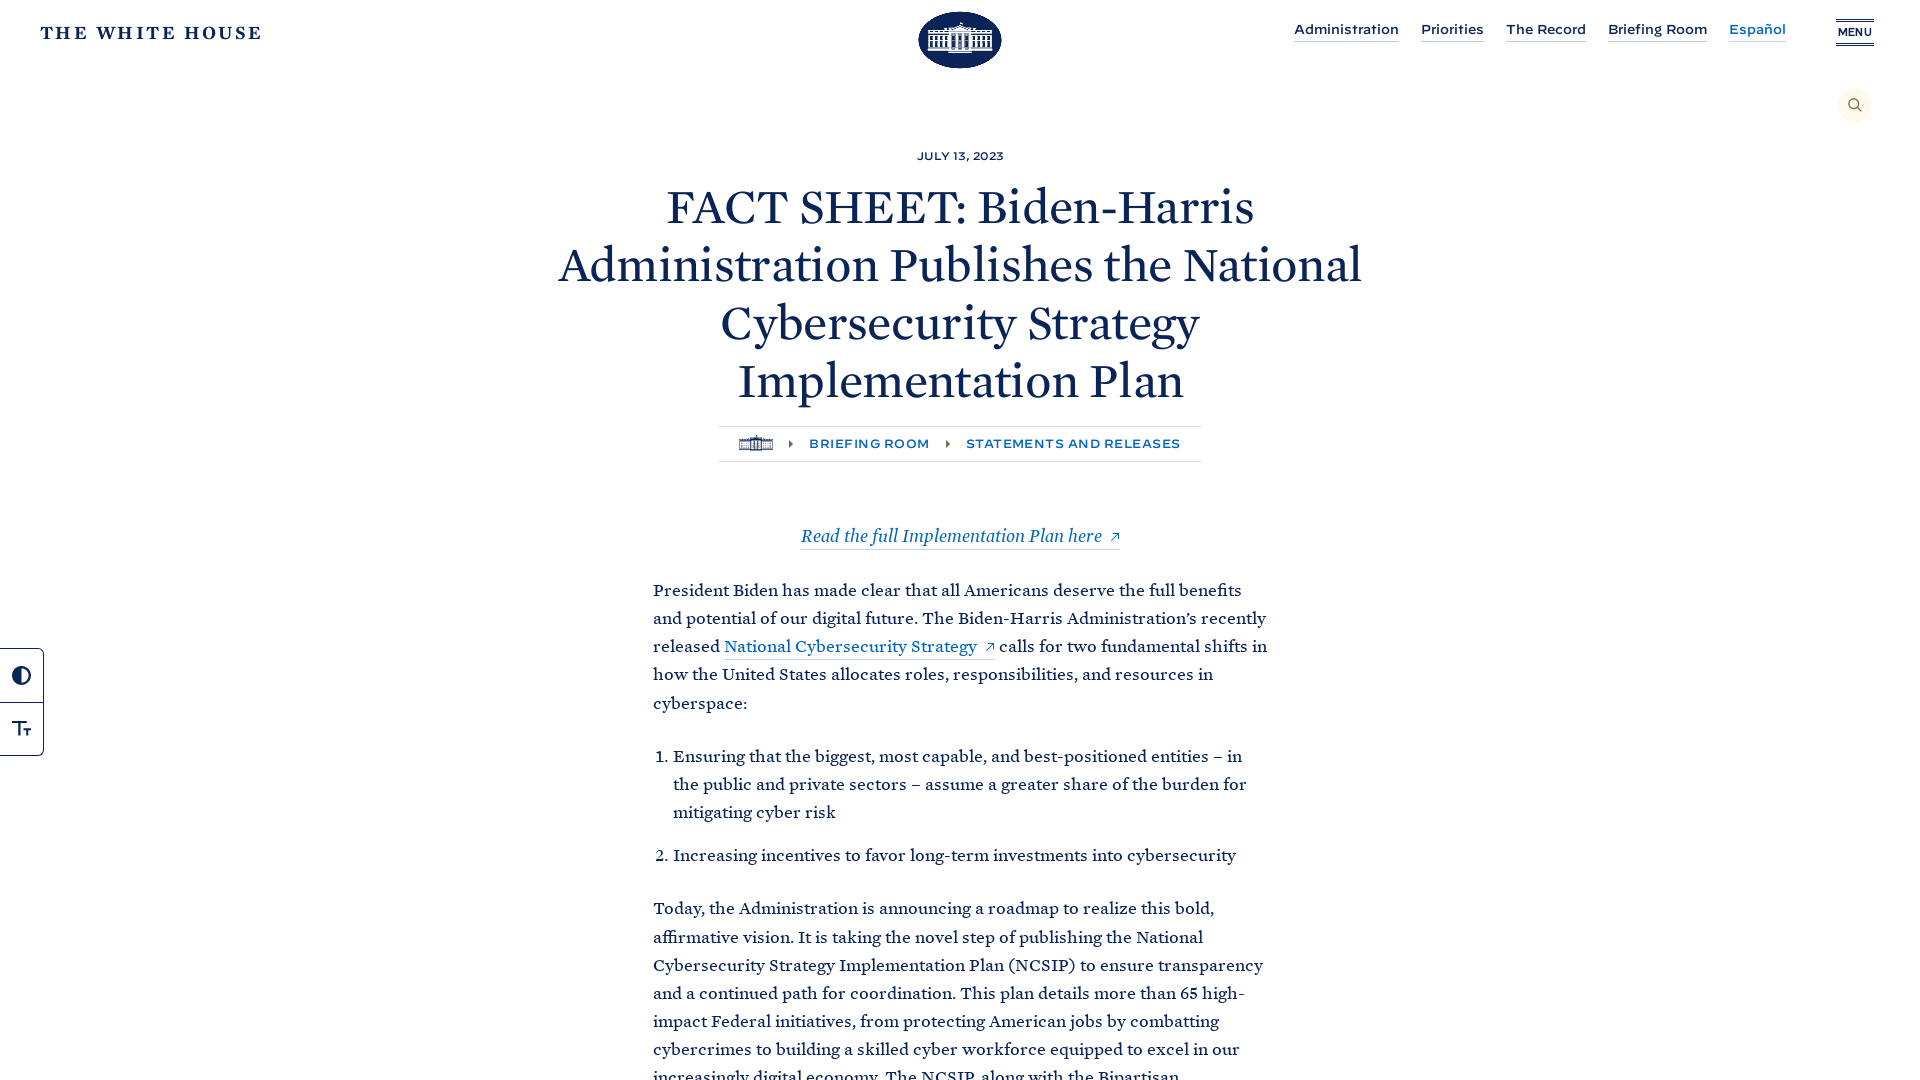 FACT SHEET: Biden-Harris Administration Publishes the National Cybersecurity Strategy Implementation Plan | The White House